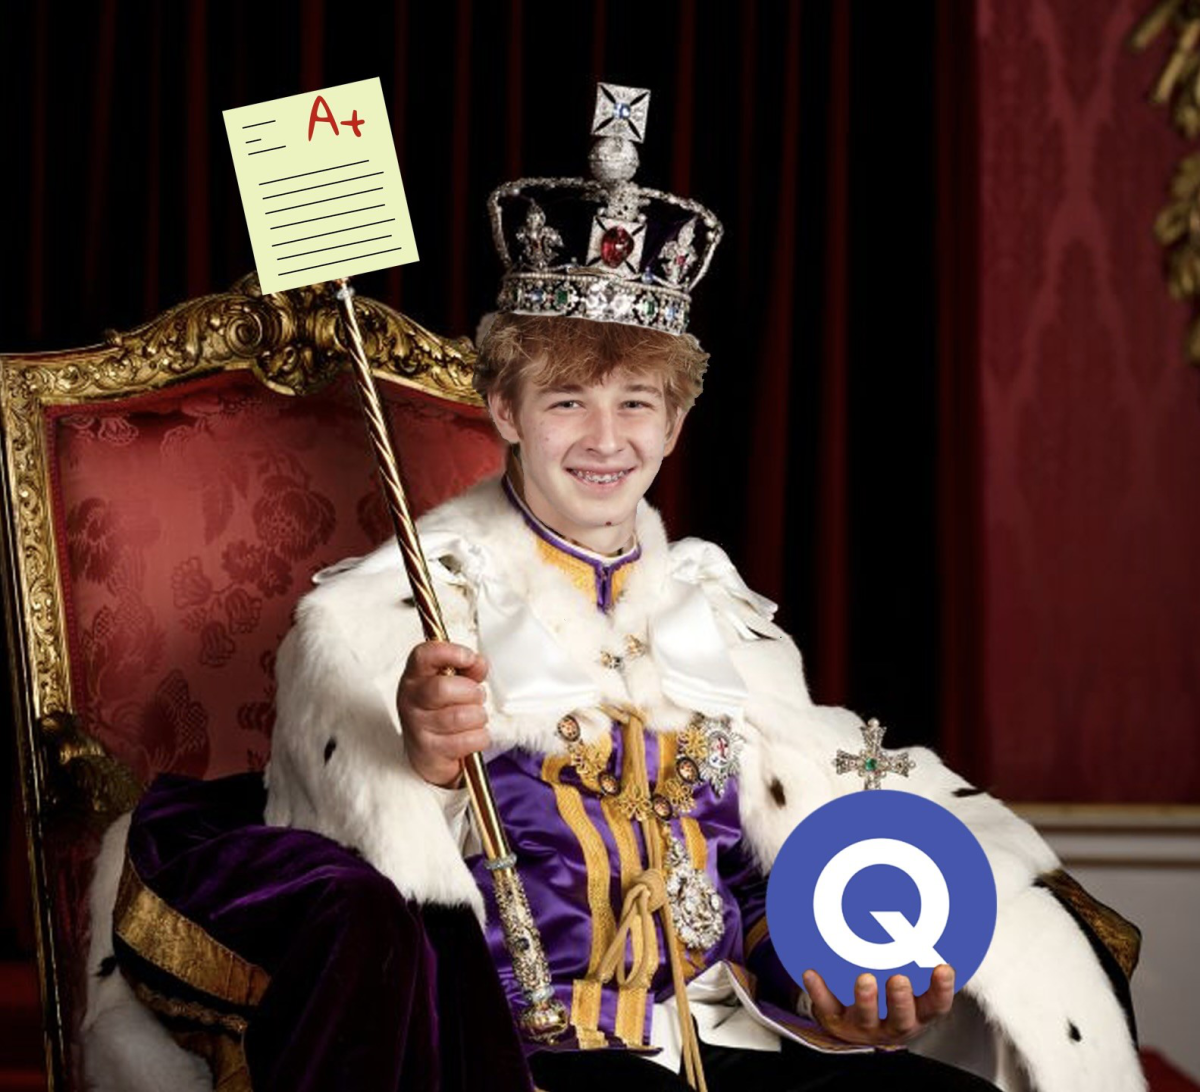 Quizlet King: The Guardian of Grades